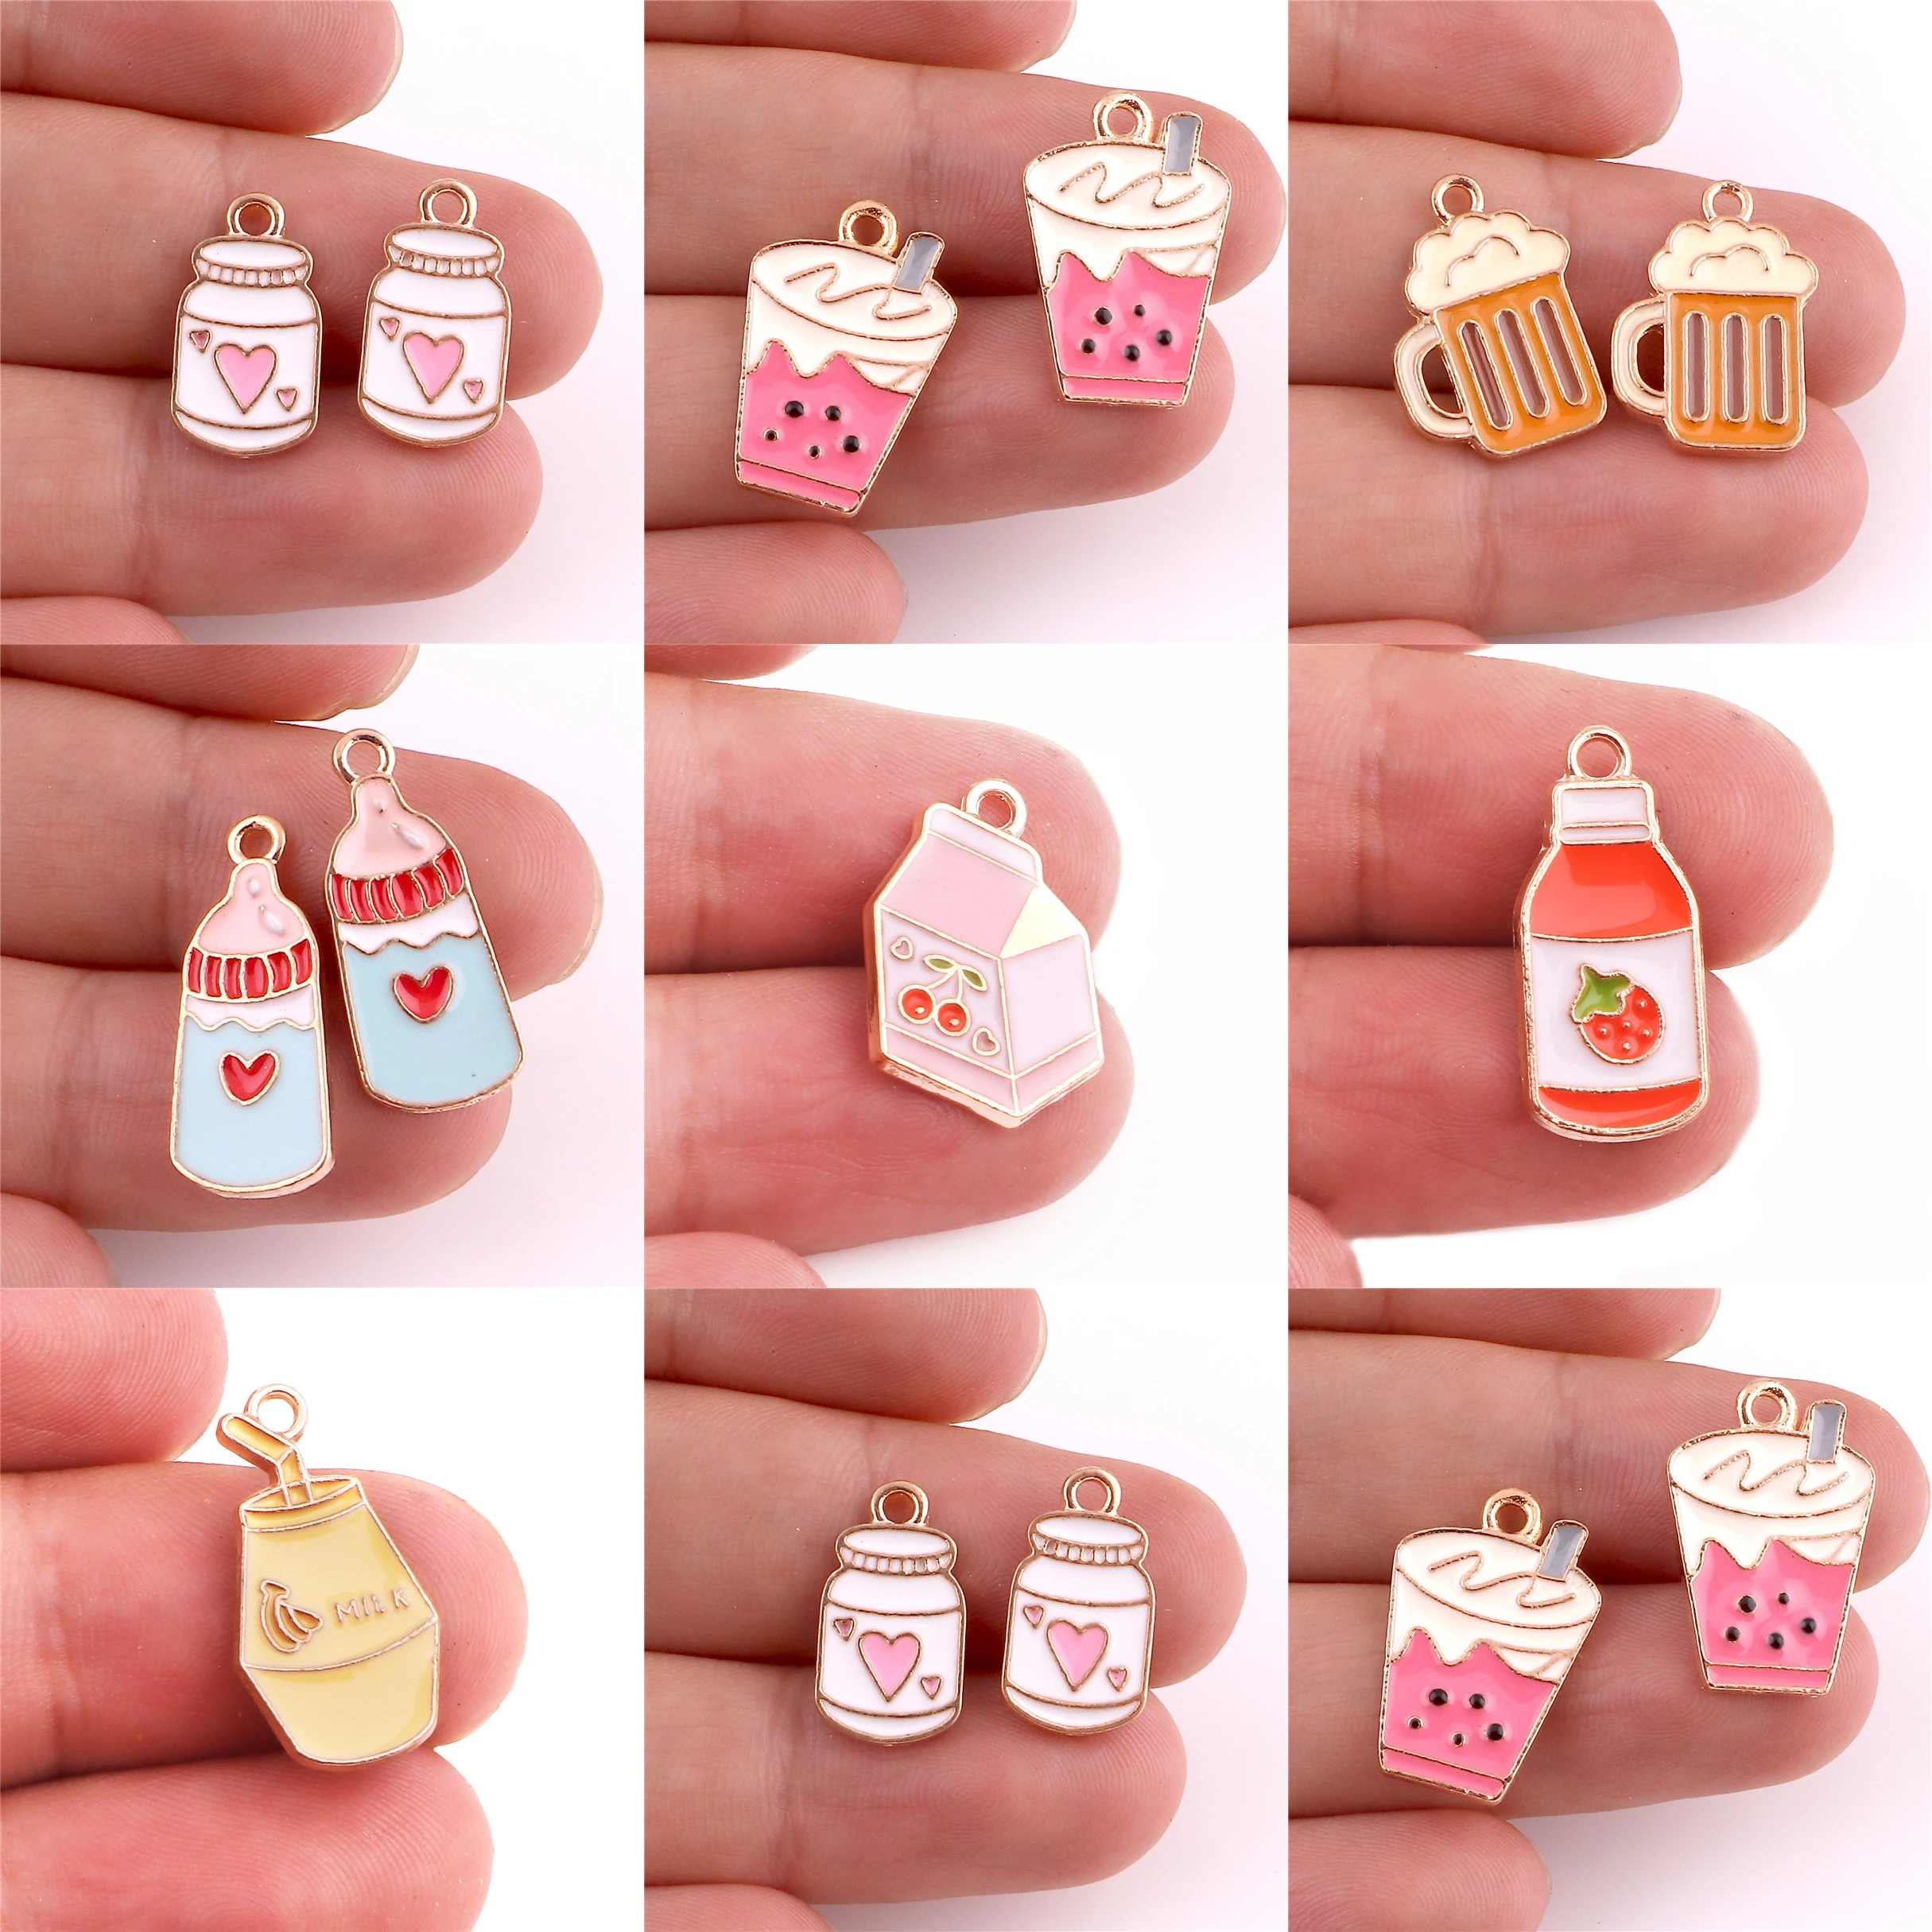 10pcs Enamels Coffee Cup Baby Bottle Alloy Earring Charms DIY Handmade Making Hair Necklace Jewelry Pendant Accessories Supplies